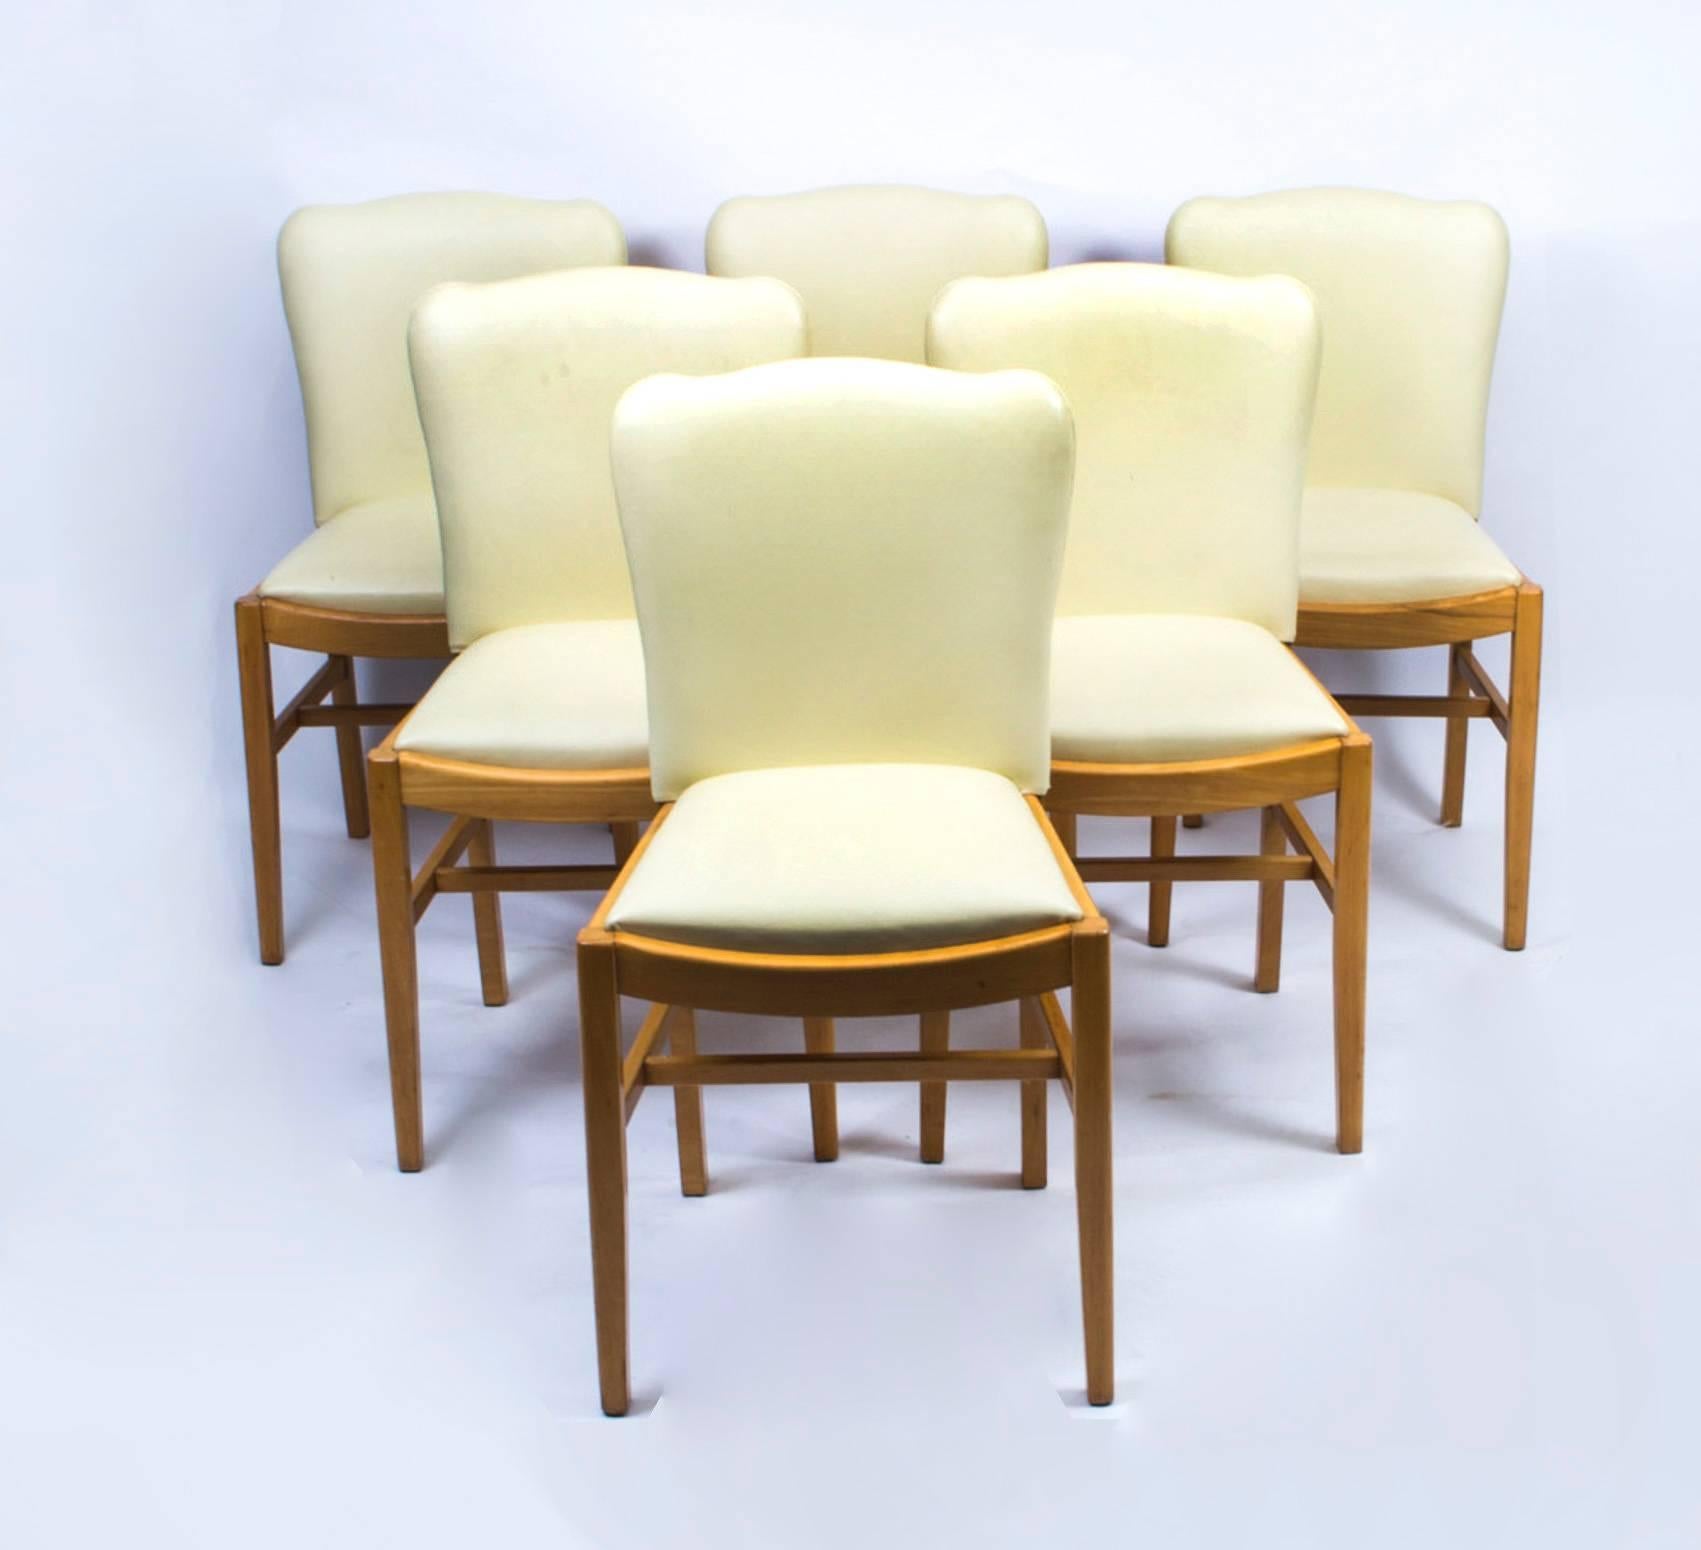 English Antique Art Deco Bird's-Eye Maple Dining Table and Six Chairs